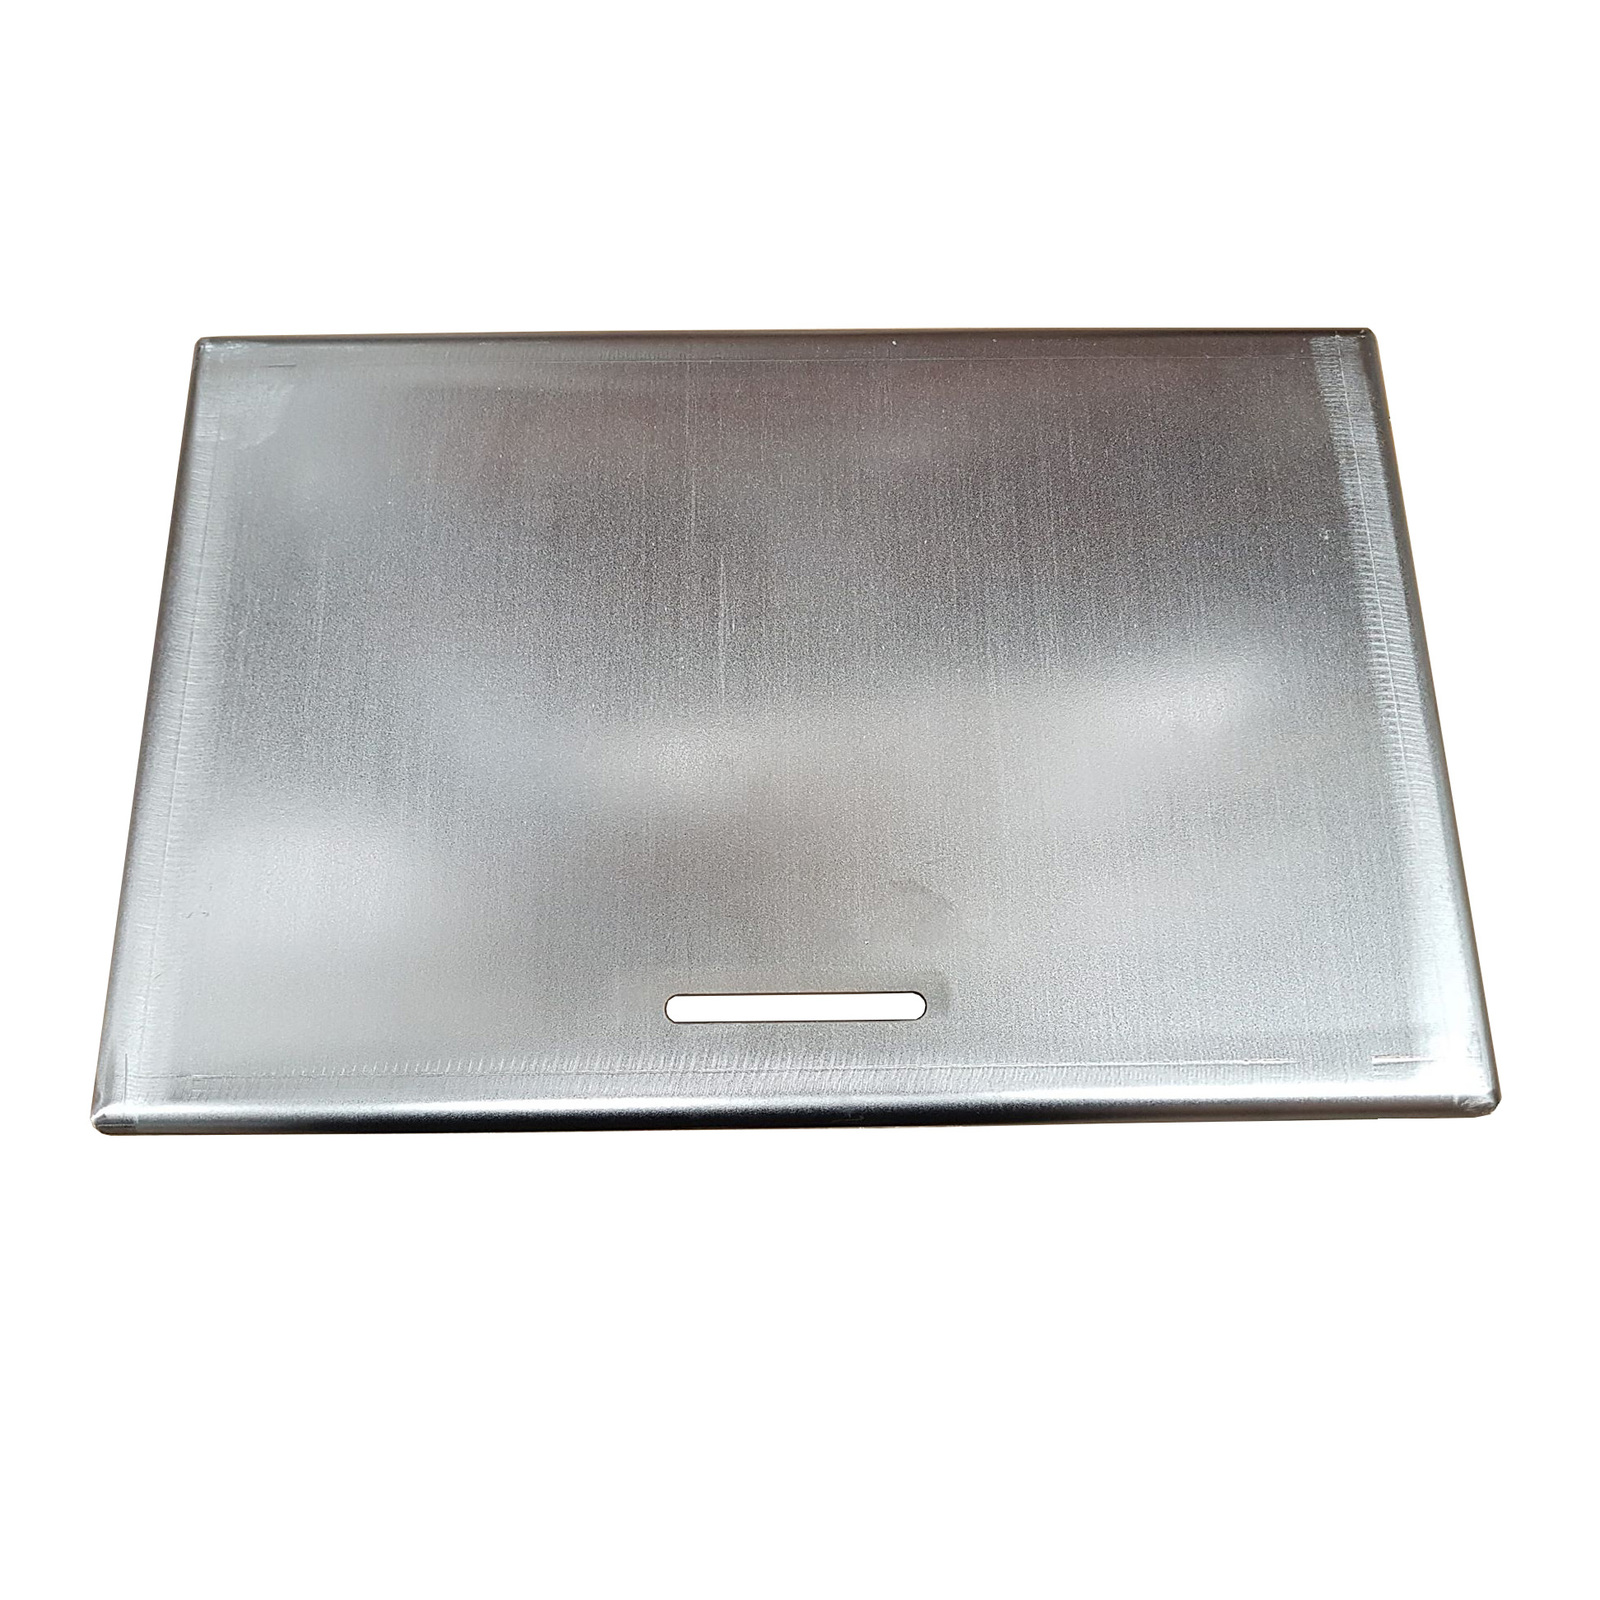 Top Notch Stainless Steel Hot Plate 480x485mm - PSS480X485